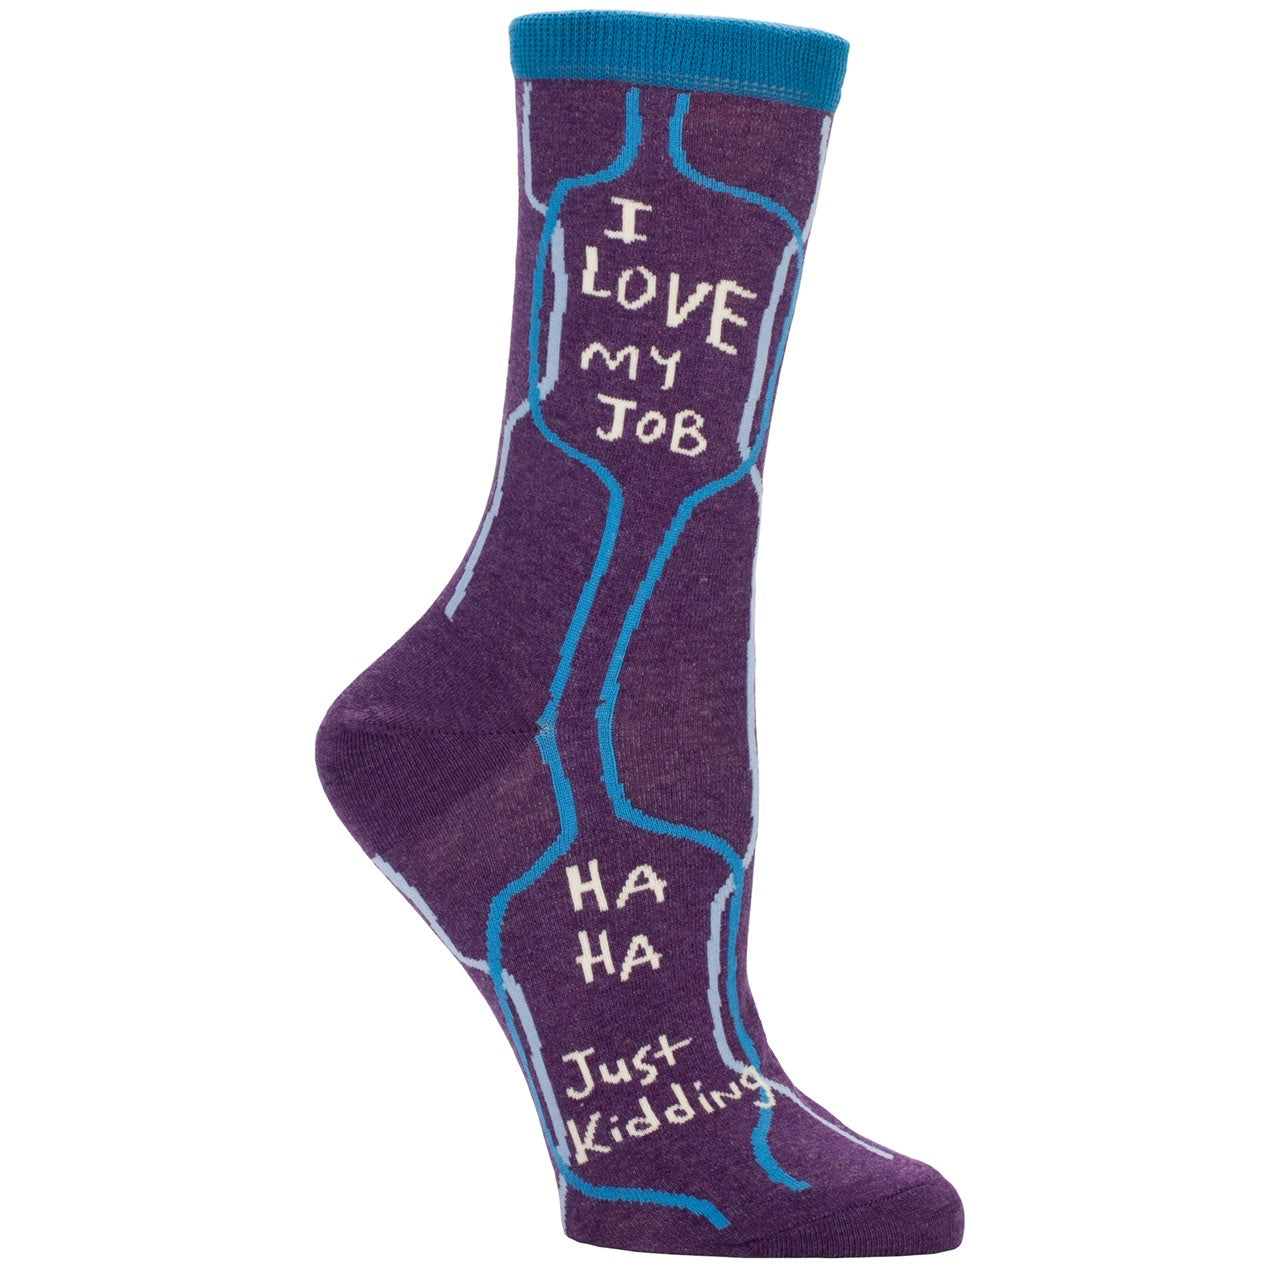 Purple Blue Q socks with text on the top that reads “ I love my job” and then at the bottom reads “HA HA just kidding”